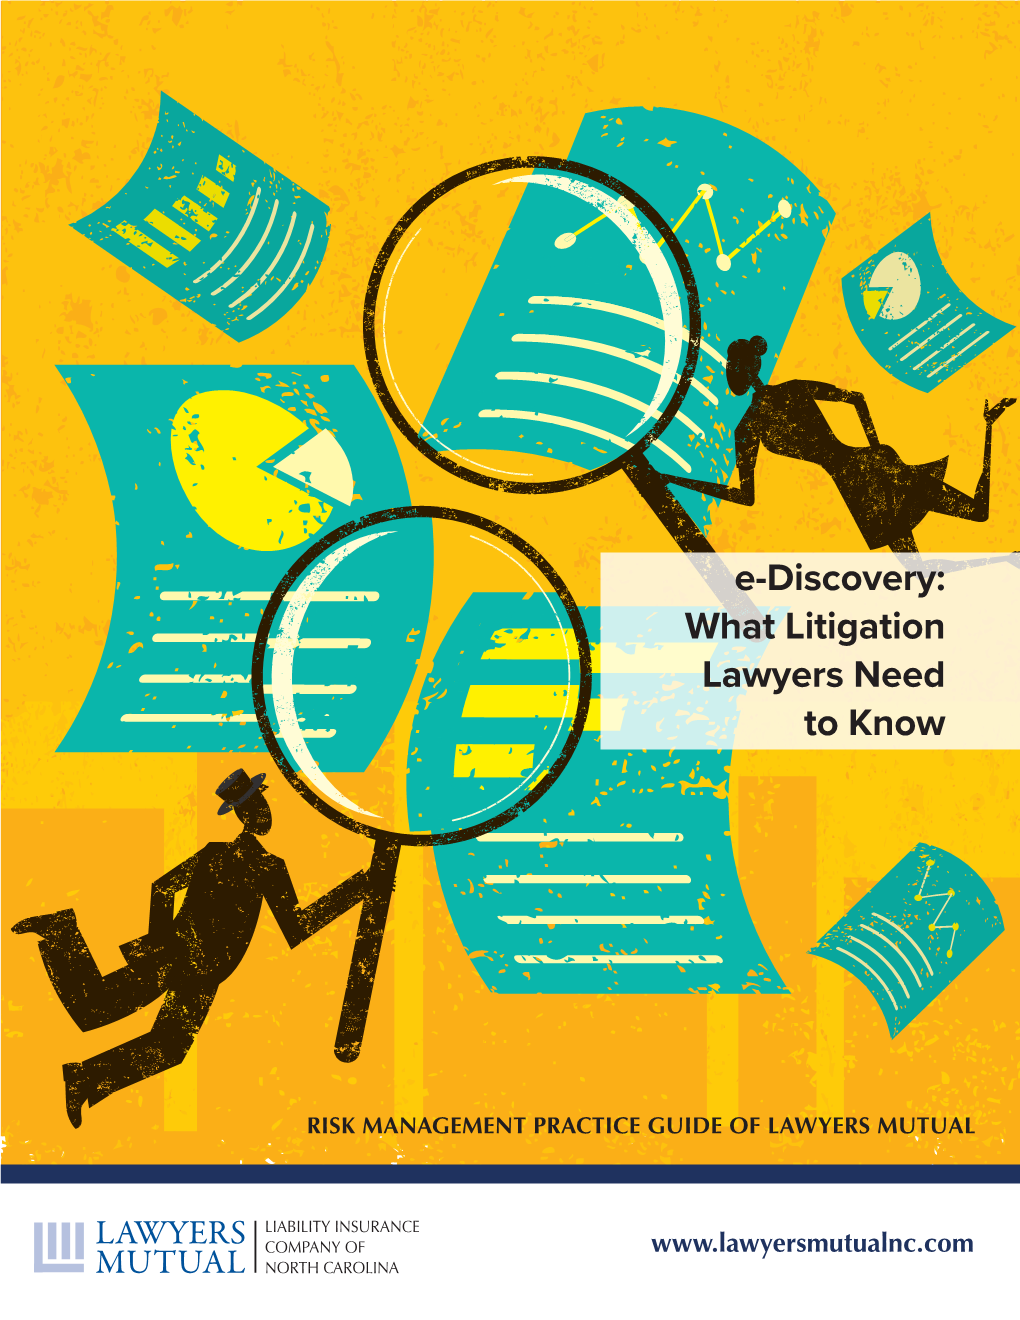 E-Discovery: What Litigation Lawyers Need to Know